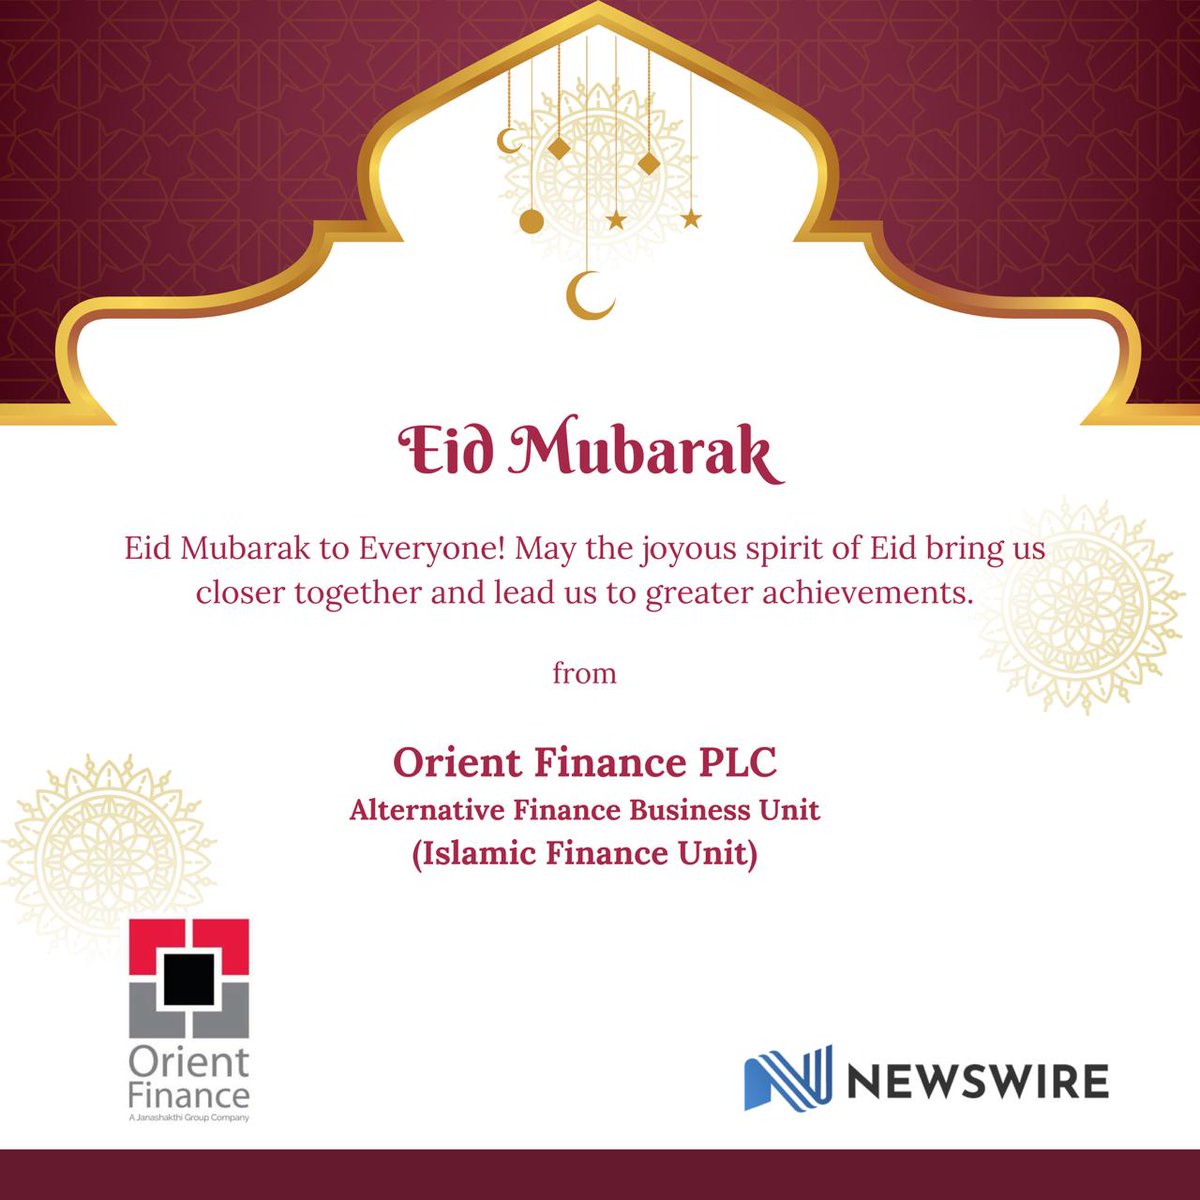 Happy Eid festival for all our readers celebrating !